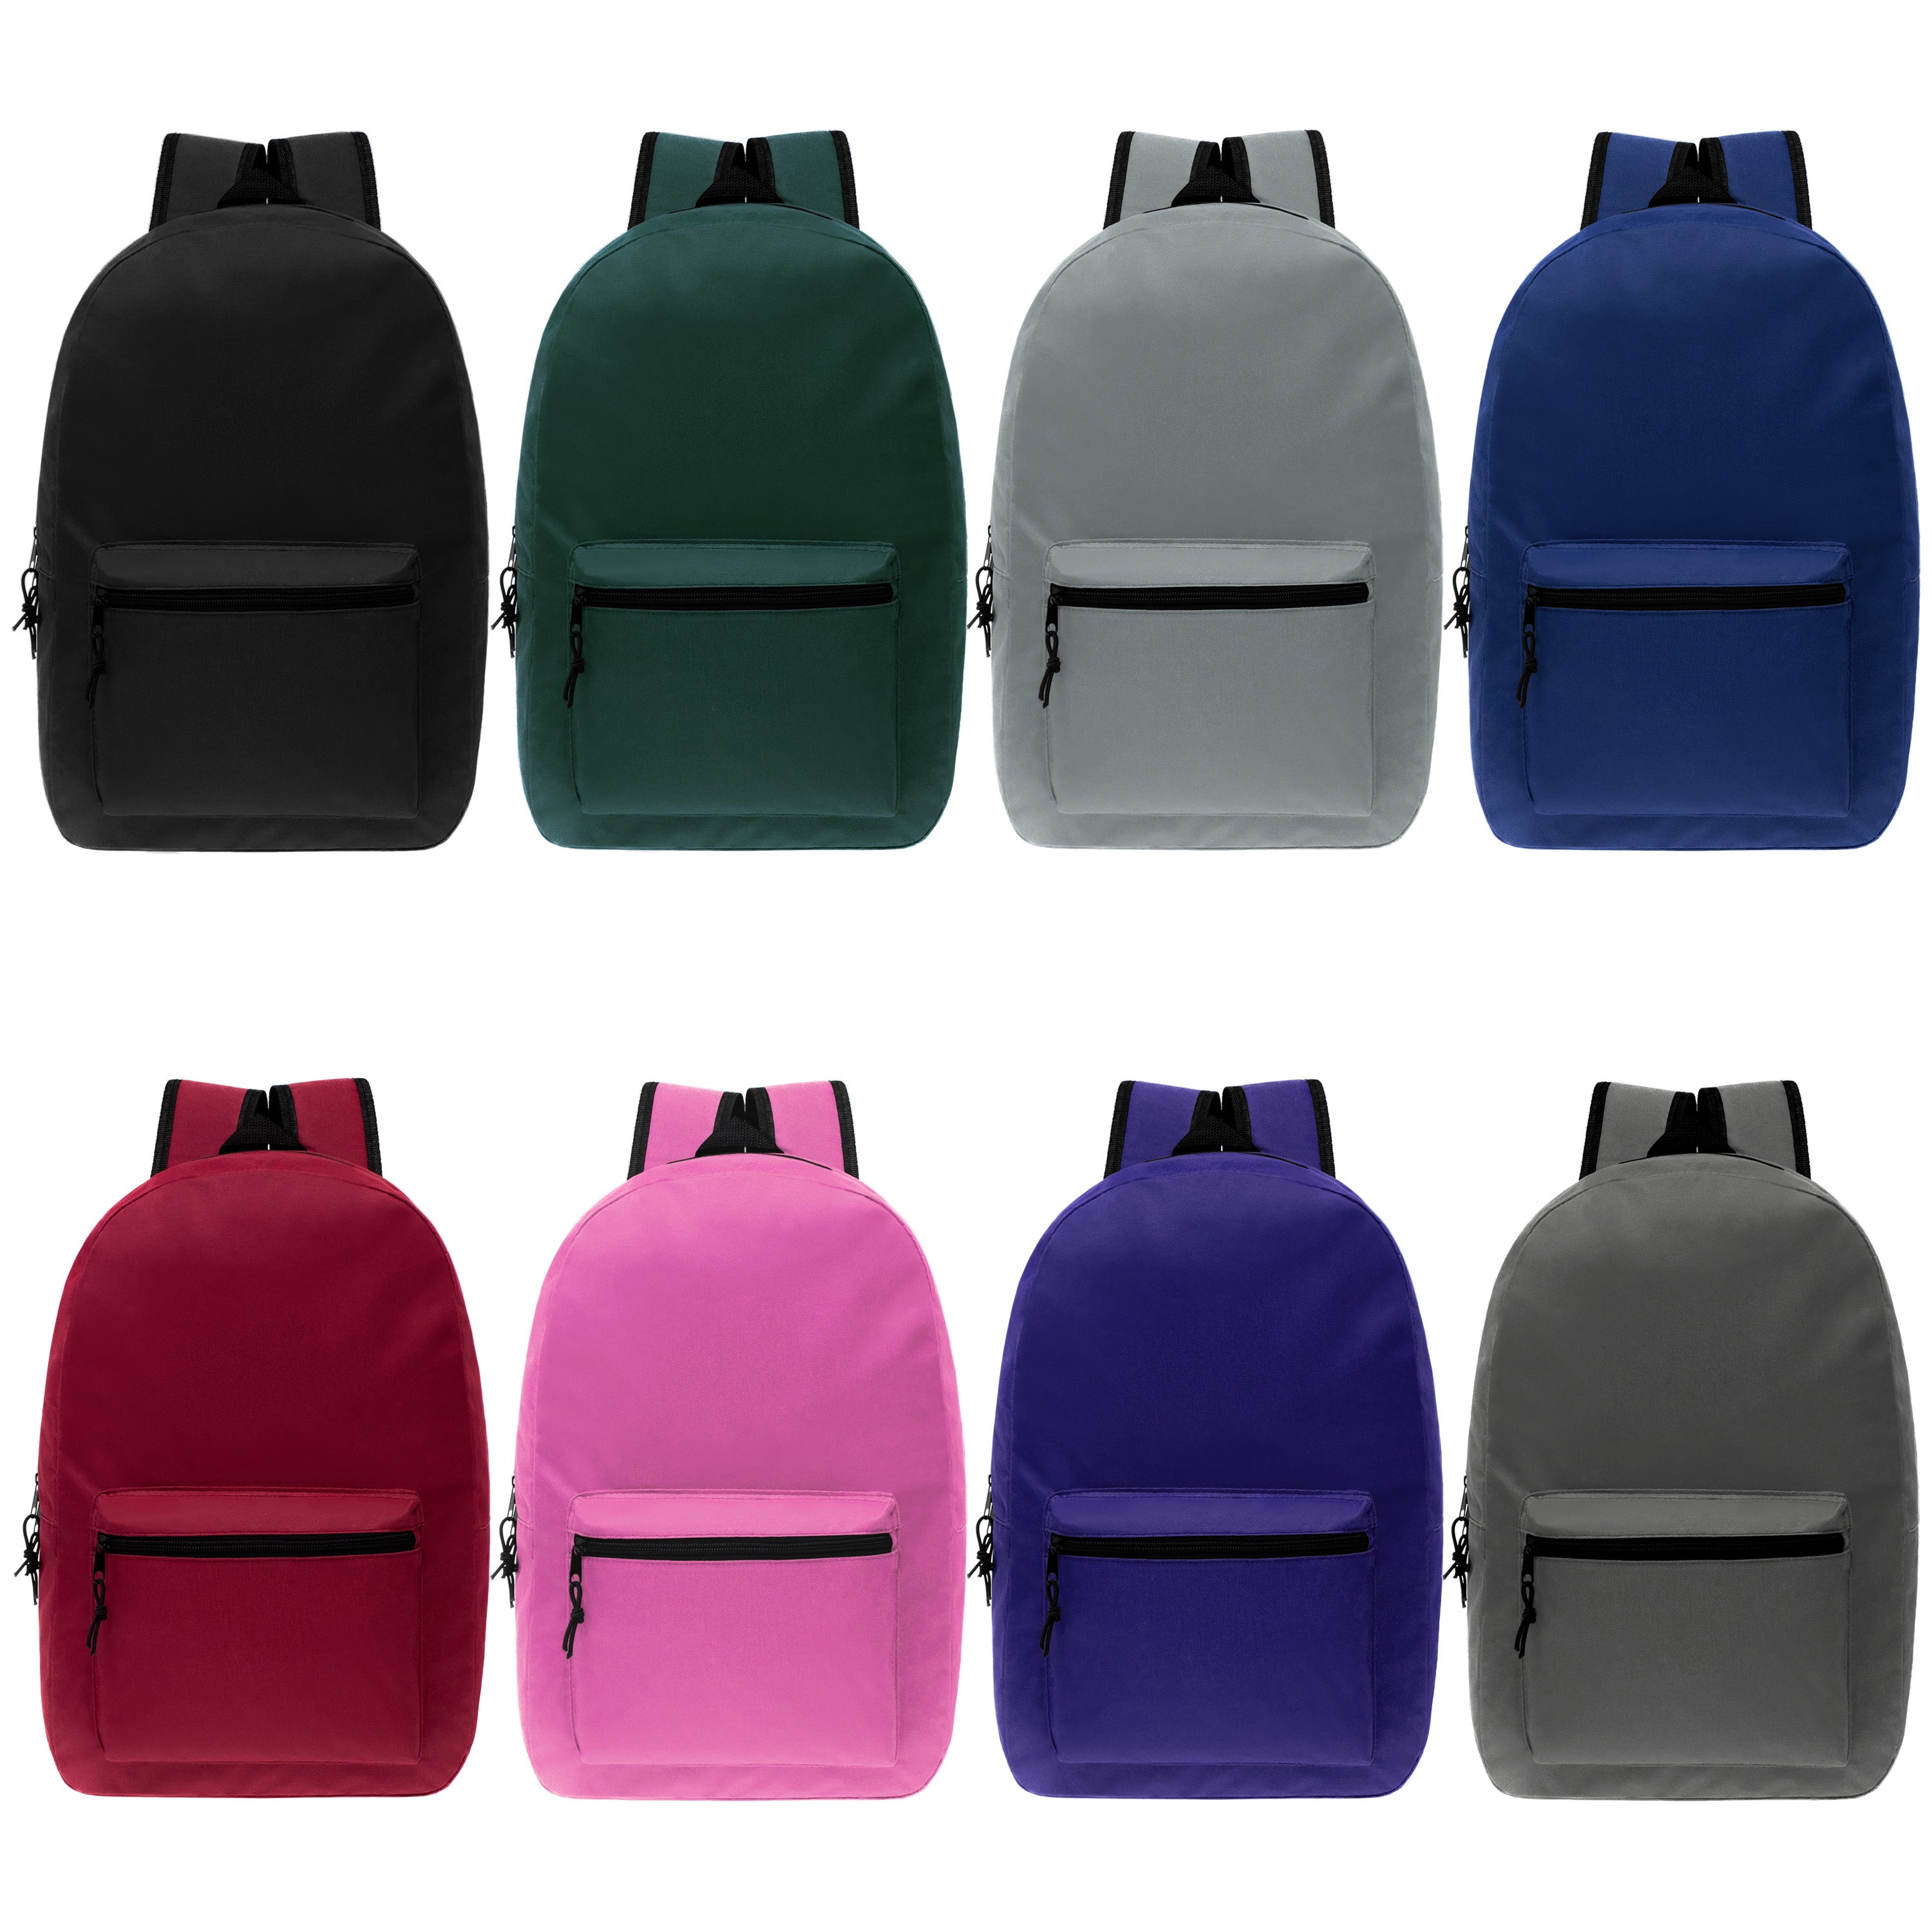 15 inches School Backpacks for Kids In Assorted Colors Bulk School Supplies Kit Case Of 12